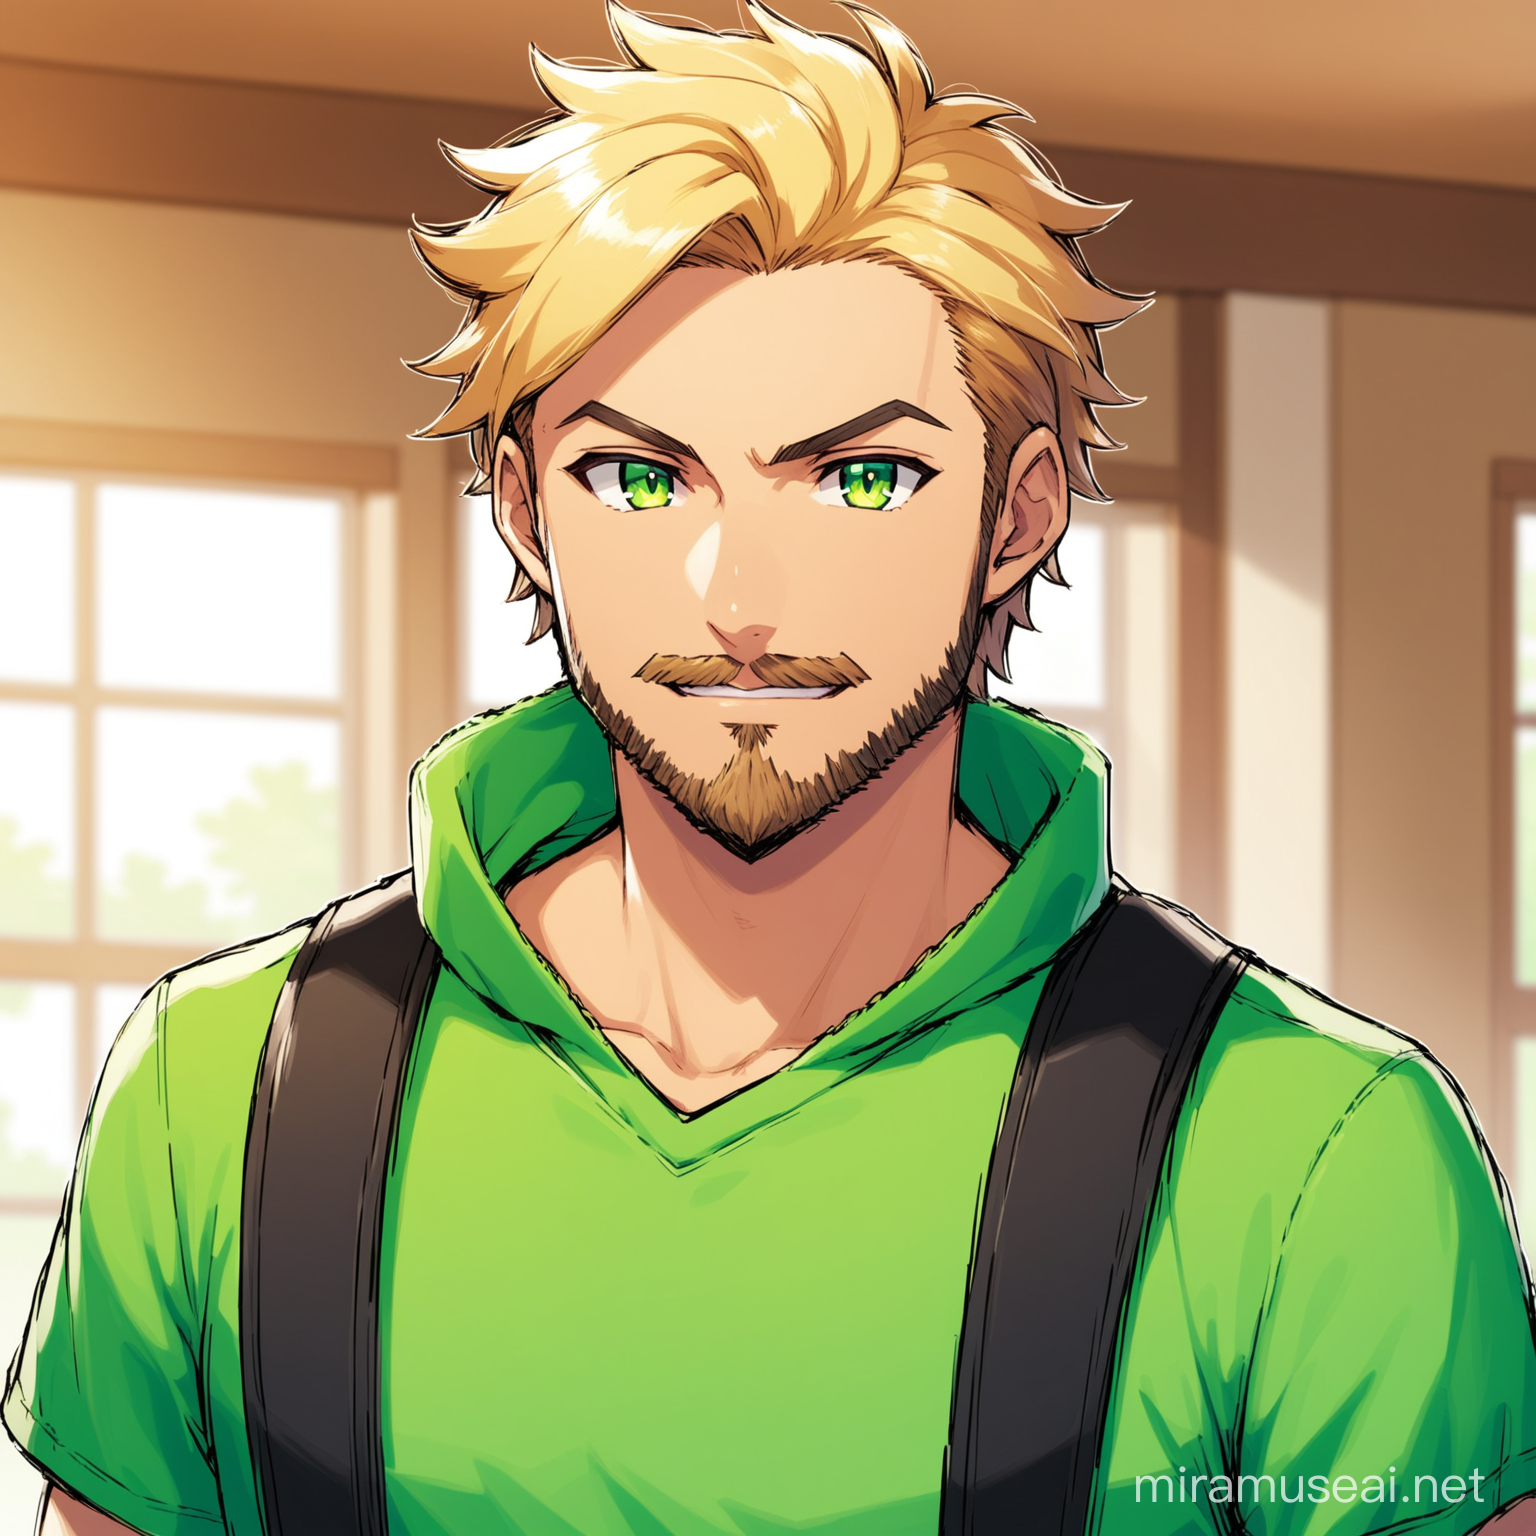 Blonde Pokmon Trainer with Green Eyes and Stubble Beard